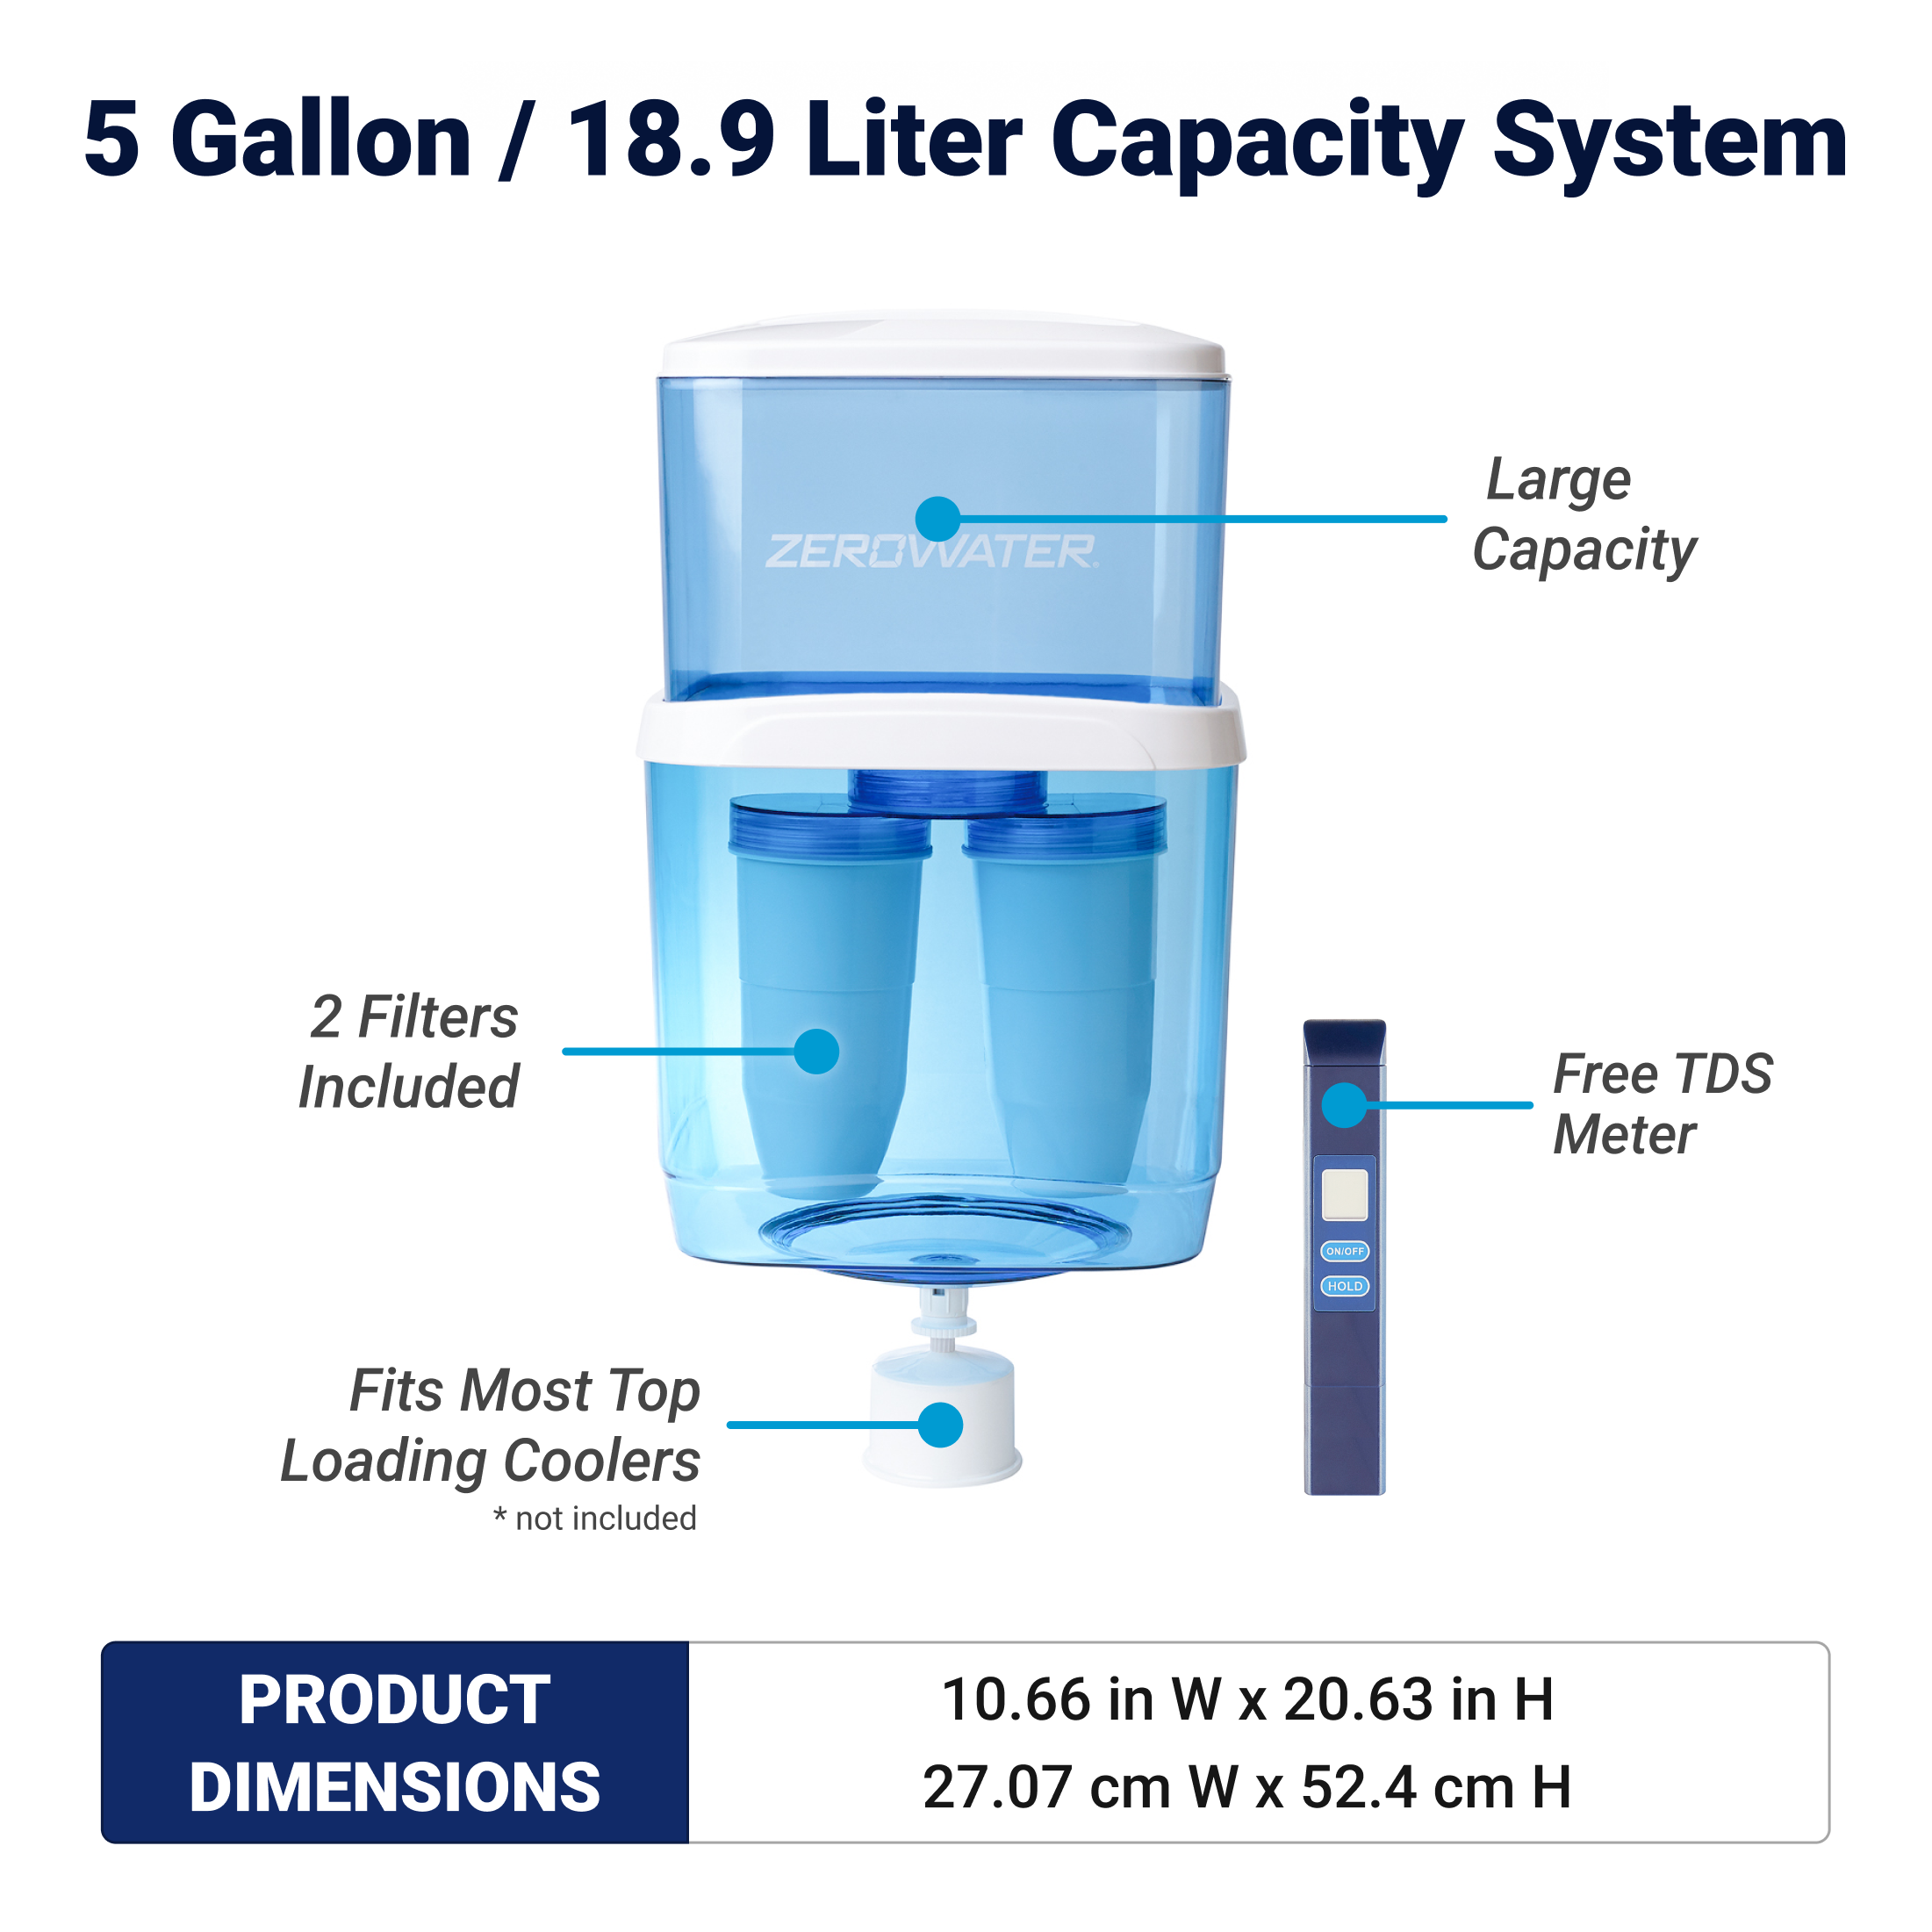 5 gallon 18.9 liter capacity system with product dimensions